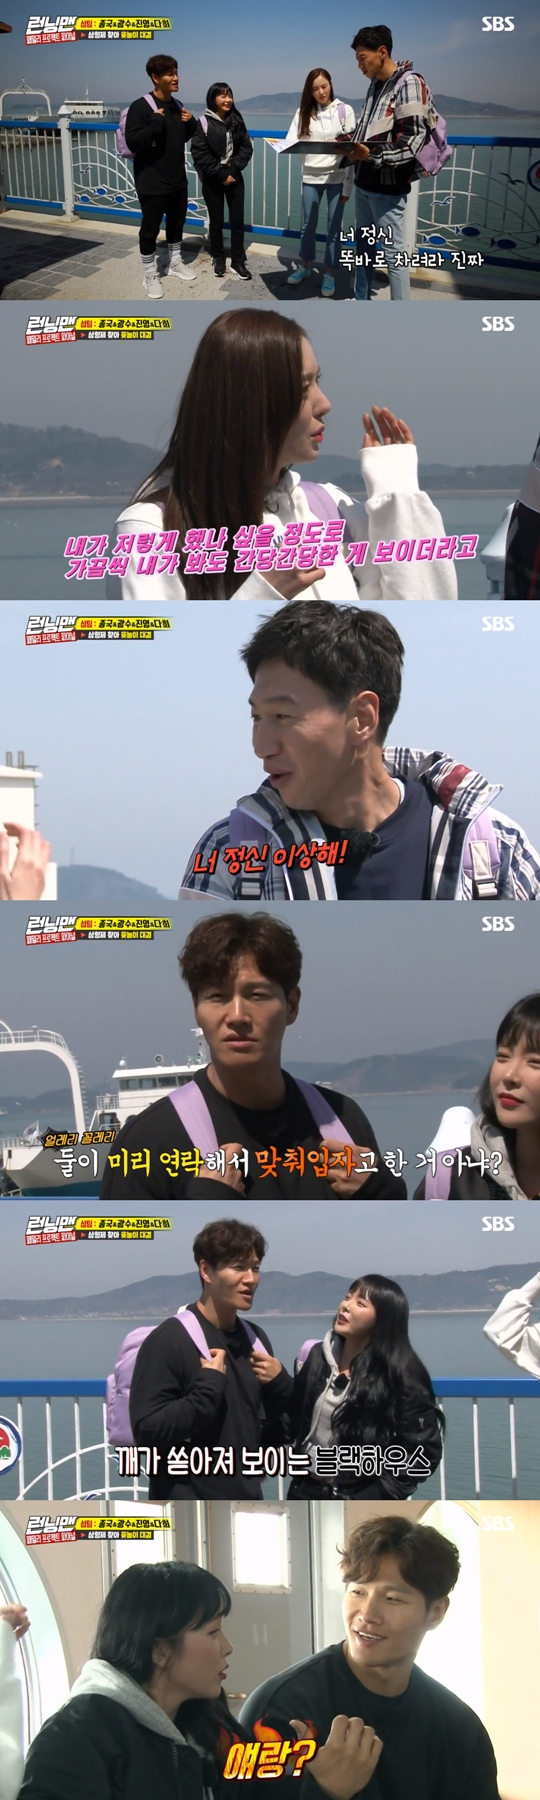 Kim Jong-kook Hong Jin-young Lee Kwang-soo Lee Da-hee suspected Seos love line in Running Man. On the afternoon of the 6th, SBS entertainment program Running Man appeared as a guest on singer Hong Jin-young, actor Lee Da-hee Kang and Lee Sang-yeop. Wang-soo Hong Jin-young Lee Da-hee became a team and left for the island.During a conversation waiting for the ship, Lee Kwang-soo warned Lee Da-hee, You have to keep the right line, or you will be uncomfortable.Lee Da-hee has appeared as a Running Man guest and showed excessive motivation, so Lee Da-hee said, I watched the broadcast and it seemed so simple that I wanted to do it.Thats also pretty edited out, Lee Kwang-soo added.Lee Da-hee said, If you talk like that, I look strange. Hong Jin-young, who was watching, teased Lee Kwang-soo and Lee Da-hee, saying, Are you two fighting for love?The production team also helped Hong Jin-young, saying, The clothes are like a couple.Lee Kwang-soo said, These two are more like couples. Kim Jong-kook and Hong Jin-young, who were dressed in black side by side, were also suspicious of Lee Kwang-soo and Lee Da-hees love line.They fit in well, Hong Jin-young told Lee Kwang-soo and Lee Da-hee, who were also angling after boarding the ship.Lee Kwang-soo said: The two are better suited.I know everyone around me. Kim Jong-kook and Hong Jin-young said, Really? With him? Hong Jin-young asked, Are you with the kid? And Do not you like it?